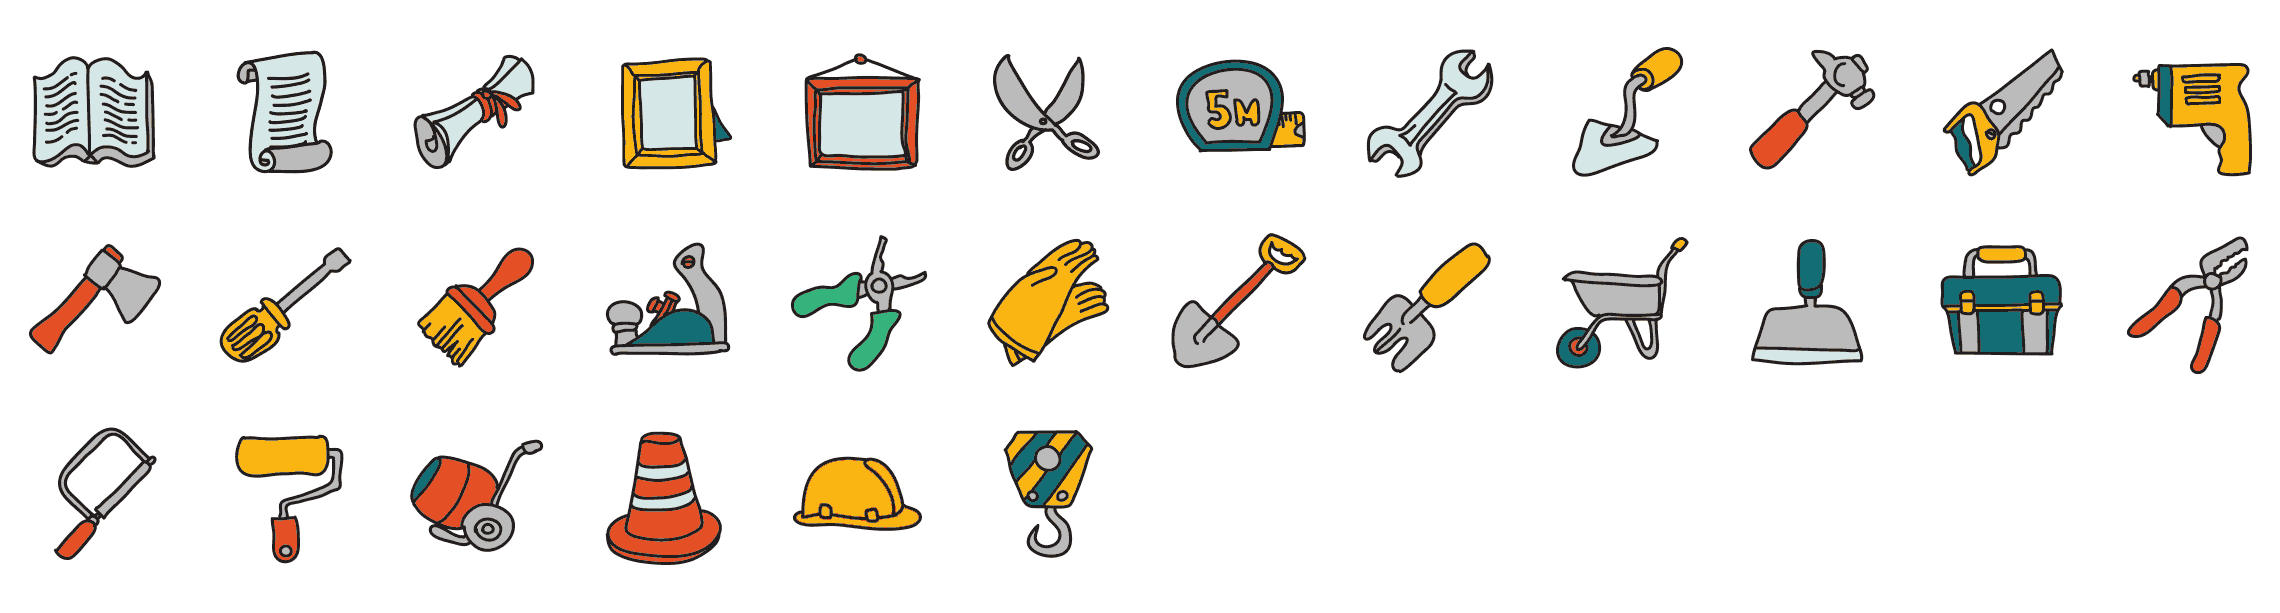 Tools-doodle-icons